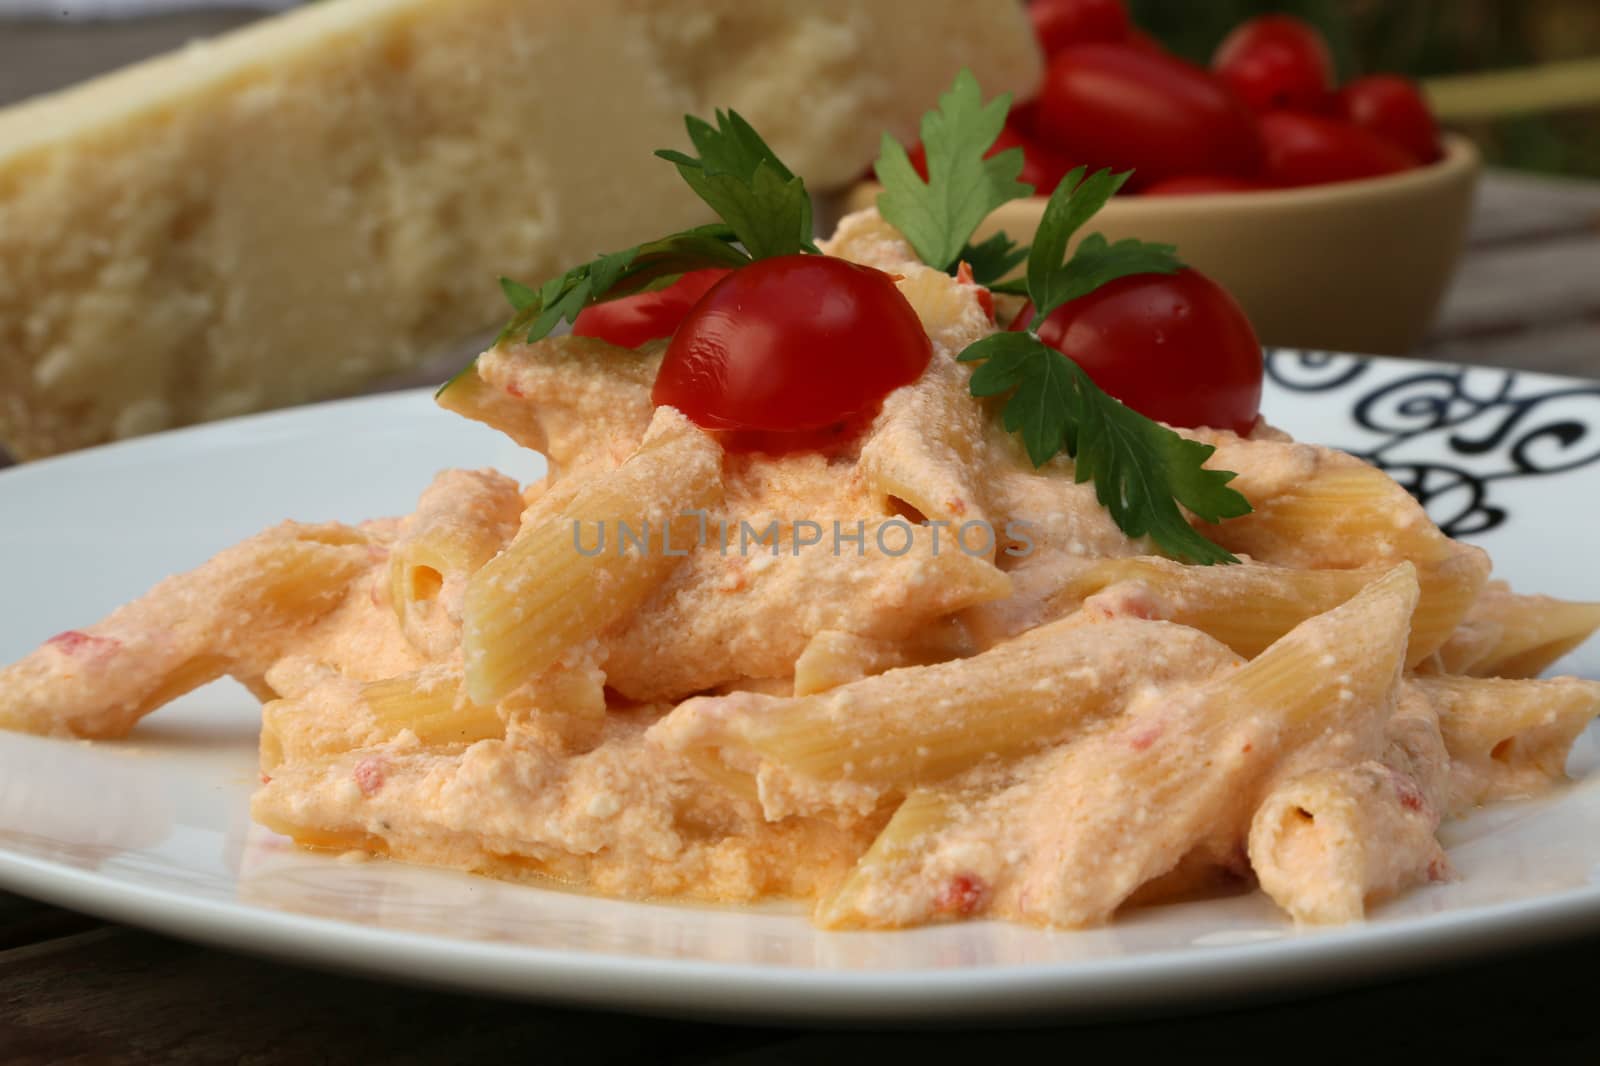 Italian pasta with ricotta cheese by tolikoff_photography